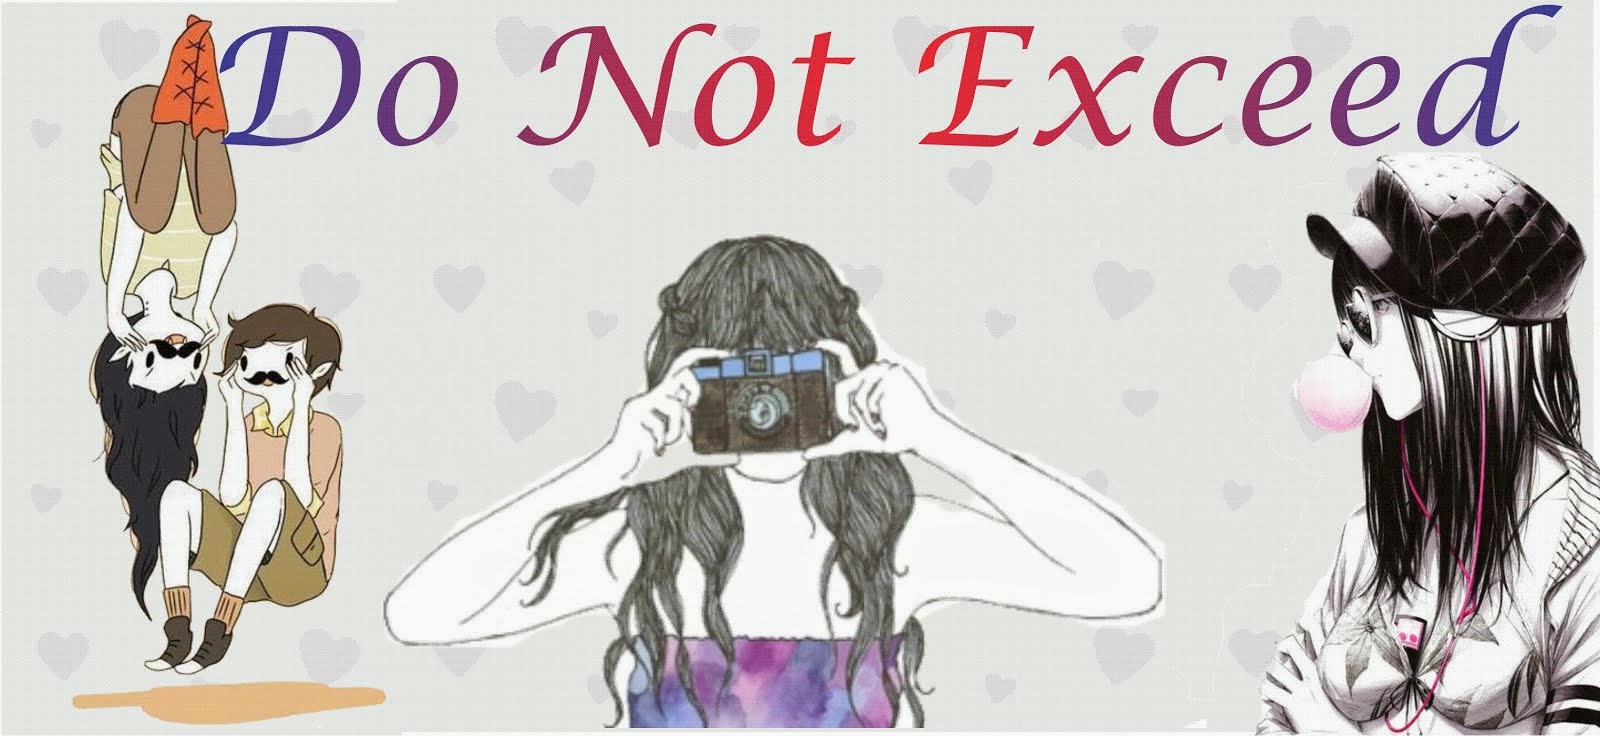 Do Not Exceed